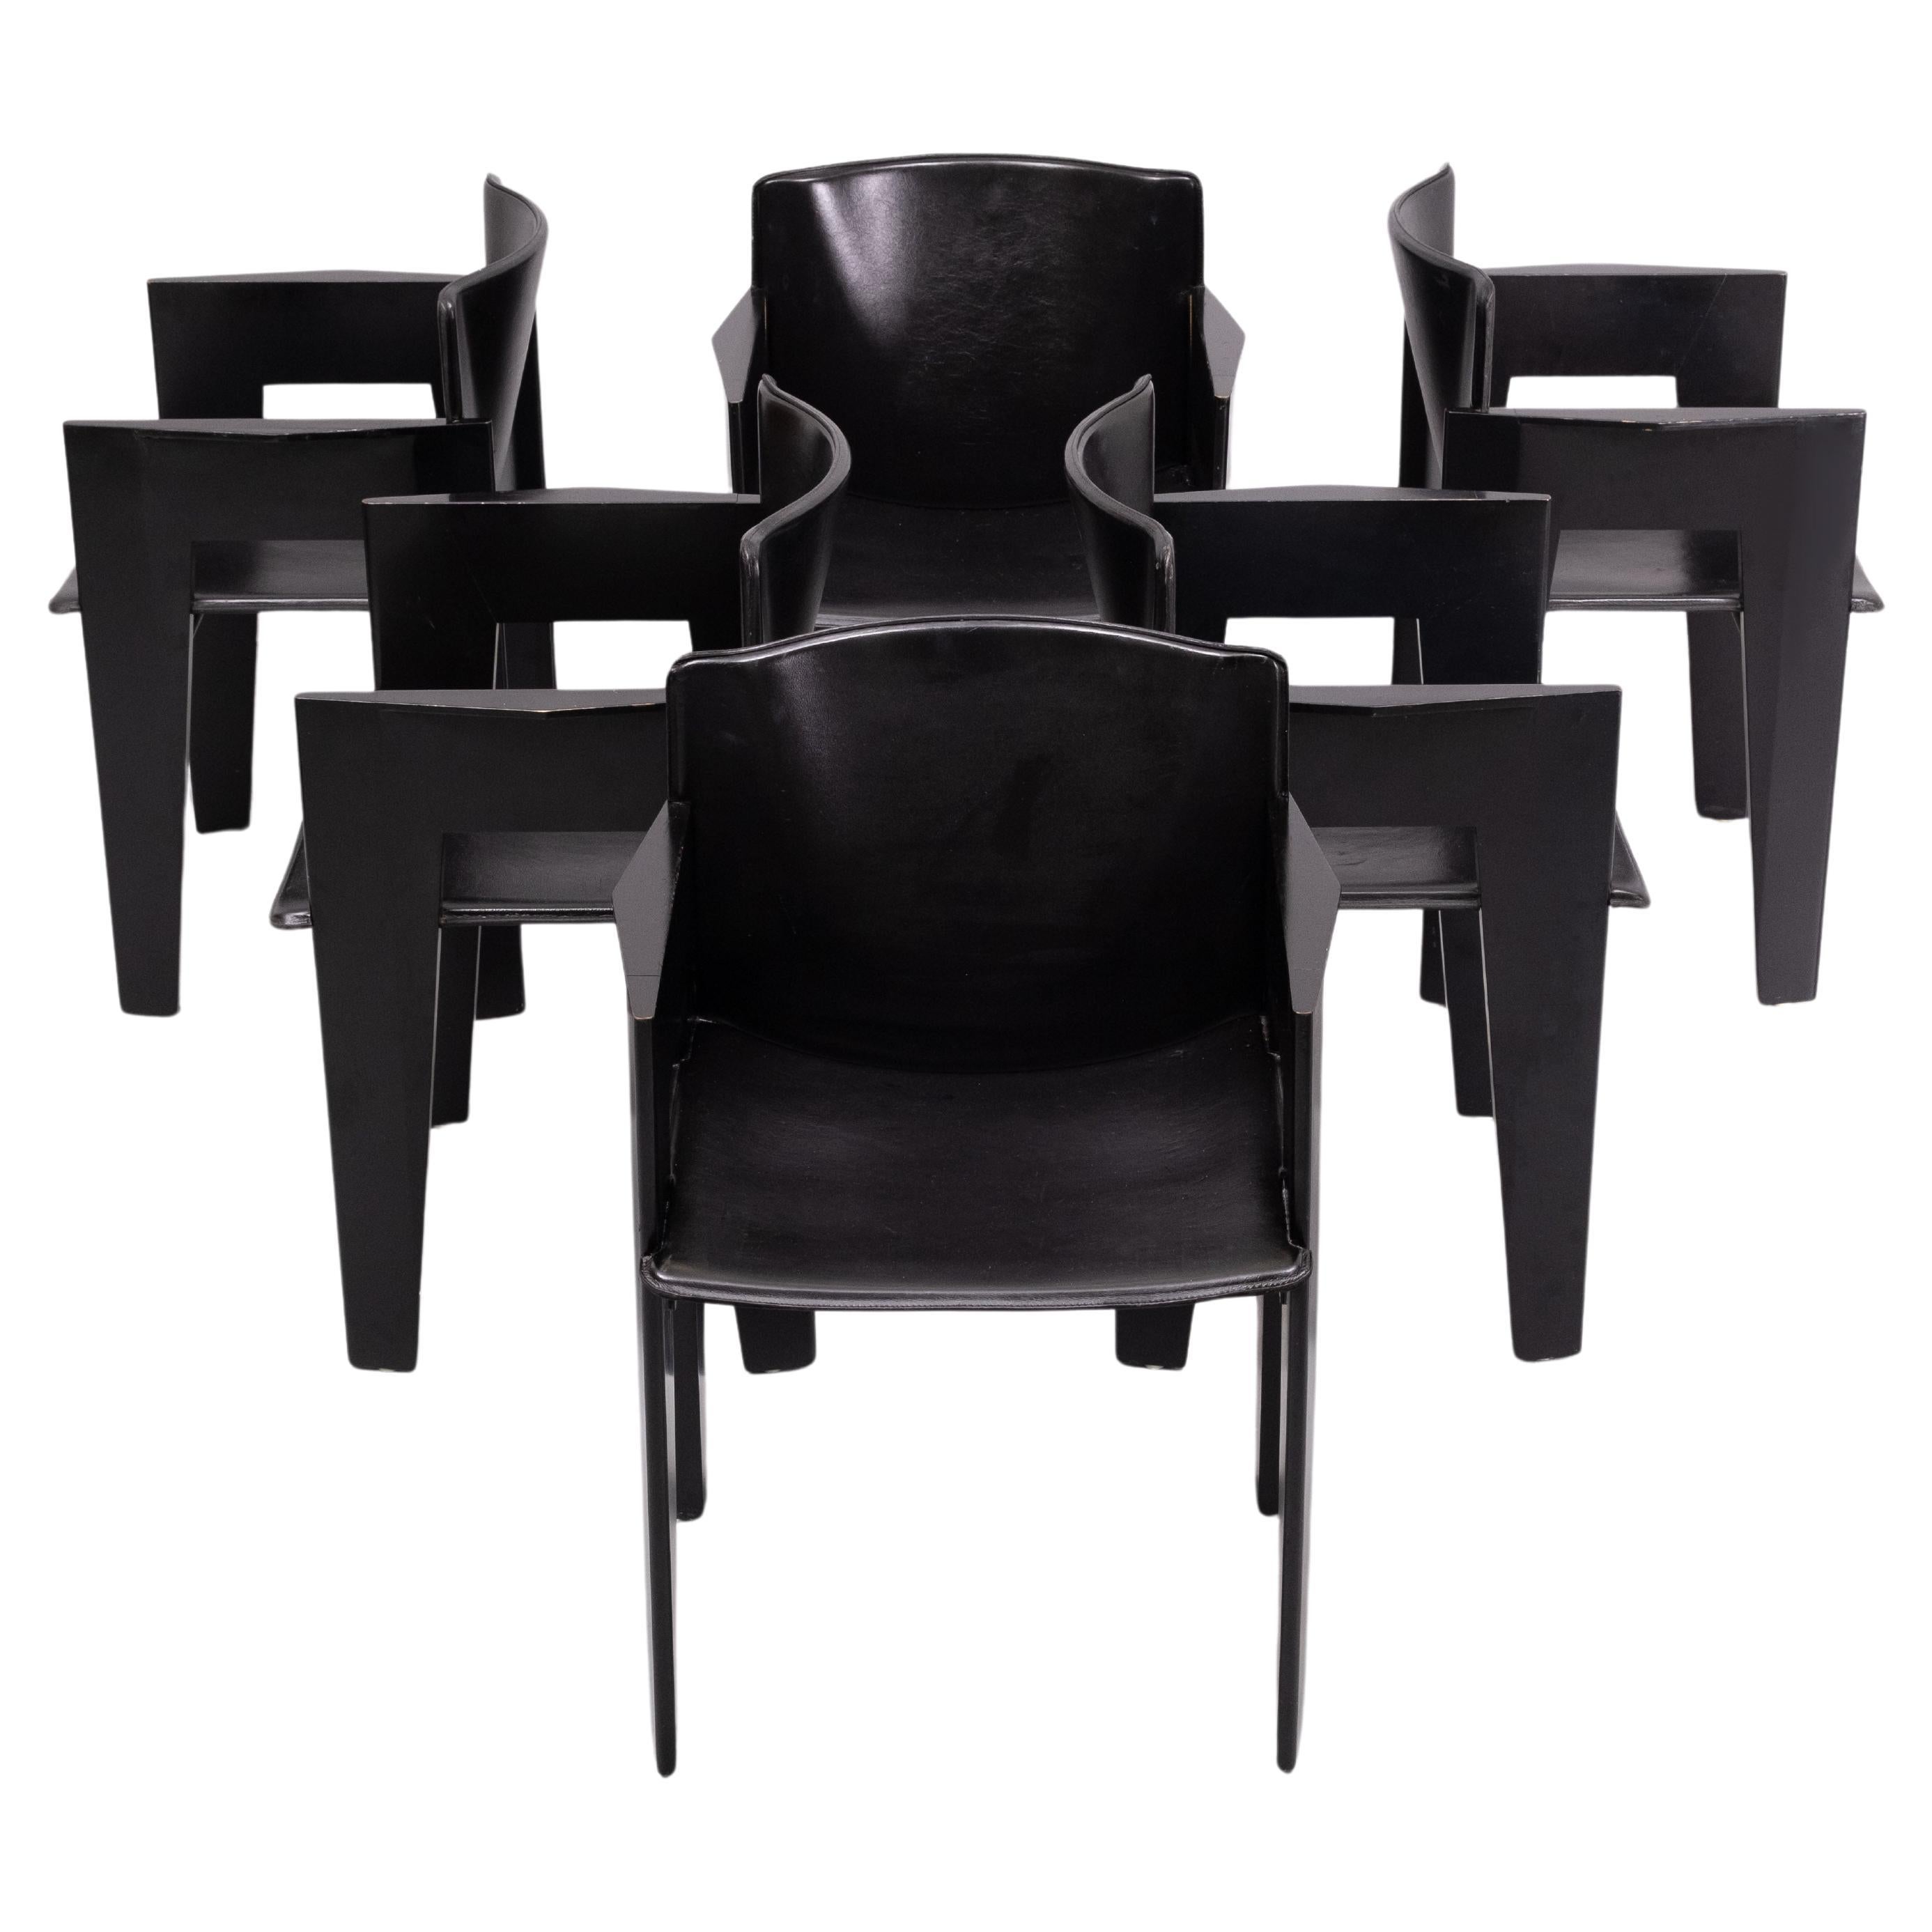 6 Postmodern chair by Arco, The Netherlands, ebonized oak and saddle leather chairs, 1980s unusual armchair designed by a Dutch architect. Sculptural and elegant appearance mixed with quality materials make these a great design.   Armrest height 66